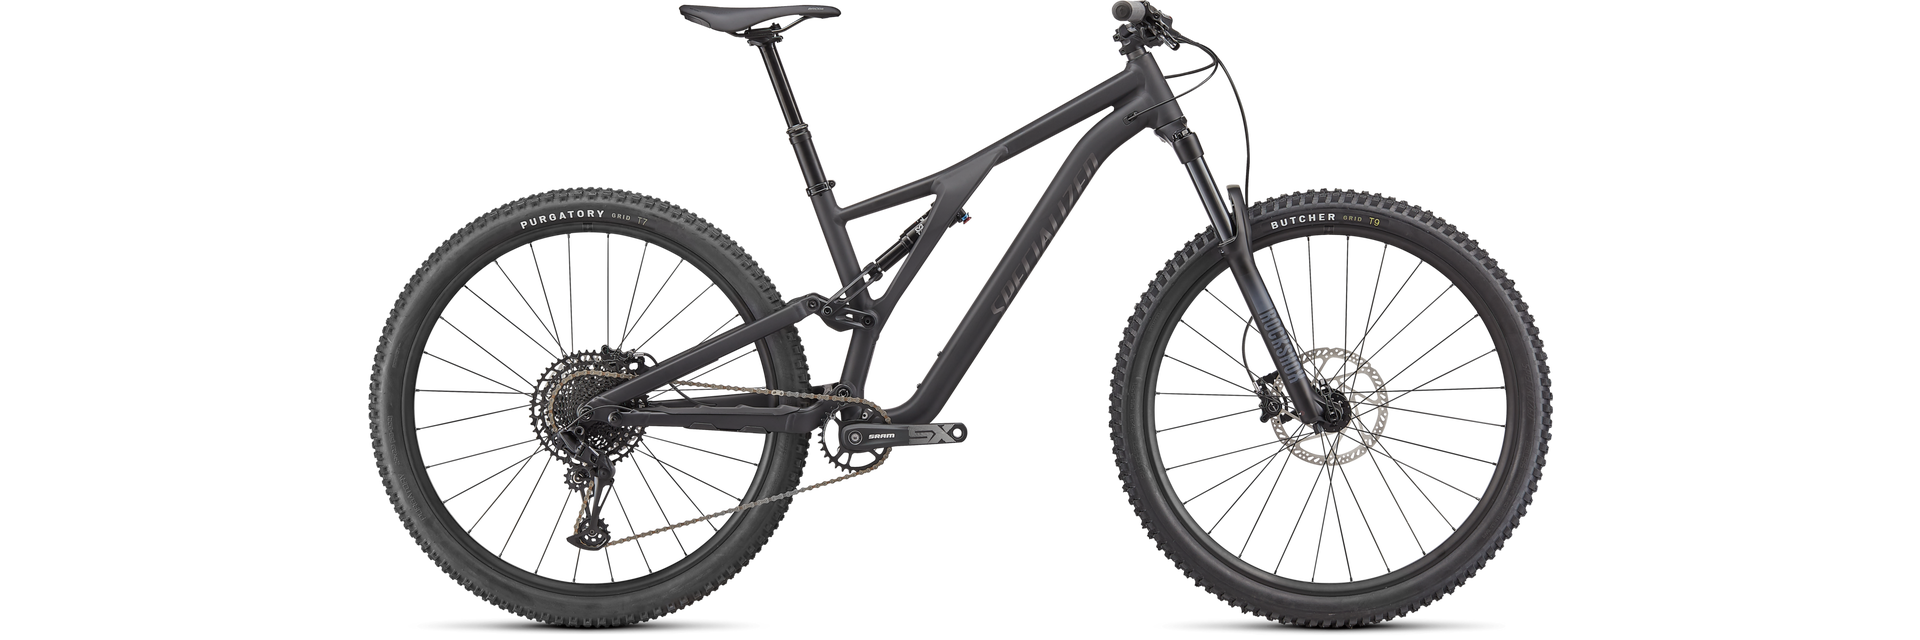 Photo - Specialized 23 Stumpjumper Alloy